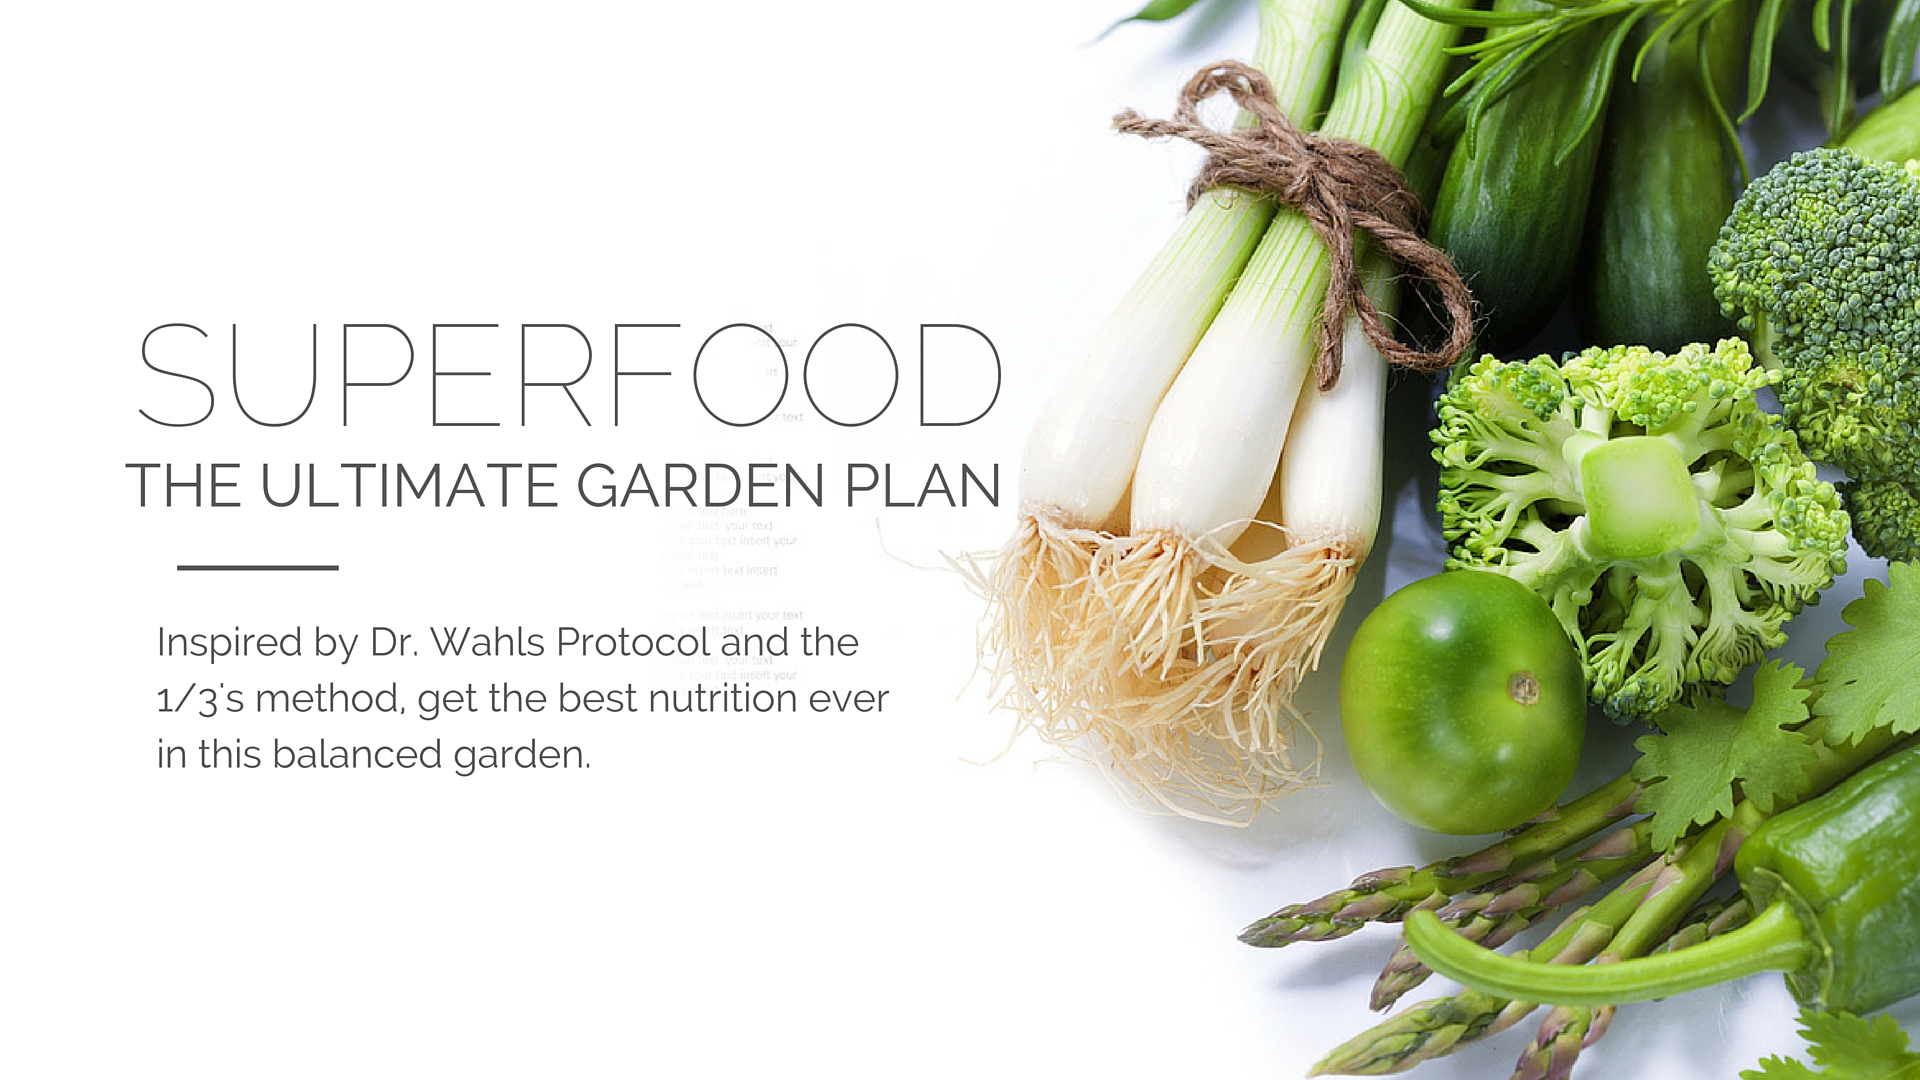 How To Plant A Superfood Garden & Grow Your Own Nutrient Dense Superfoods...